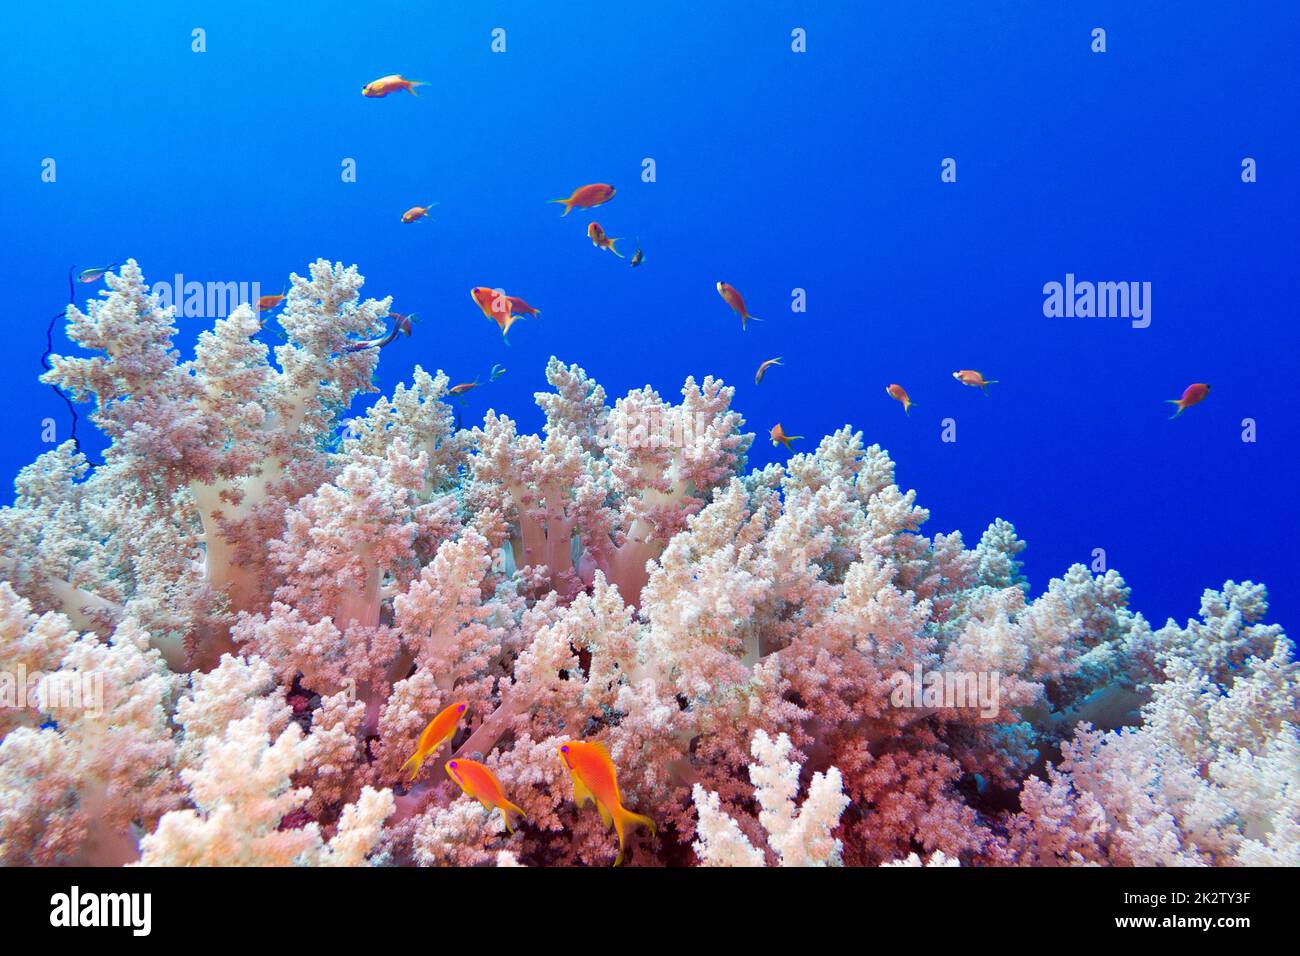 coral reef with sotf broccoli coral and exotic fishes anthias at the botto of tropical sea Stock Photo